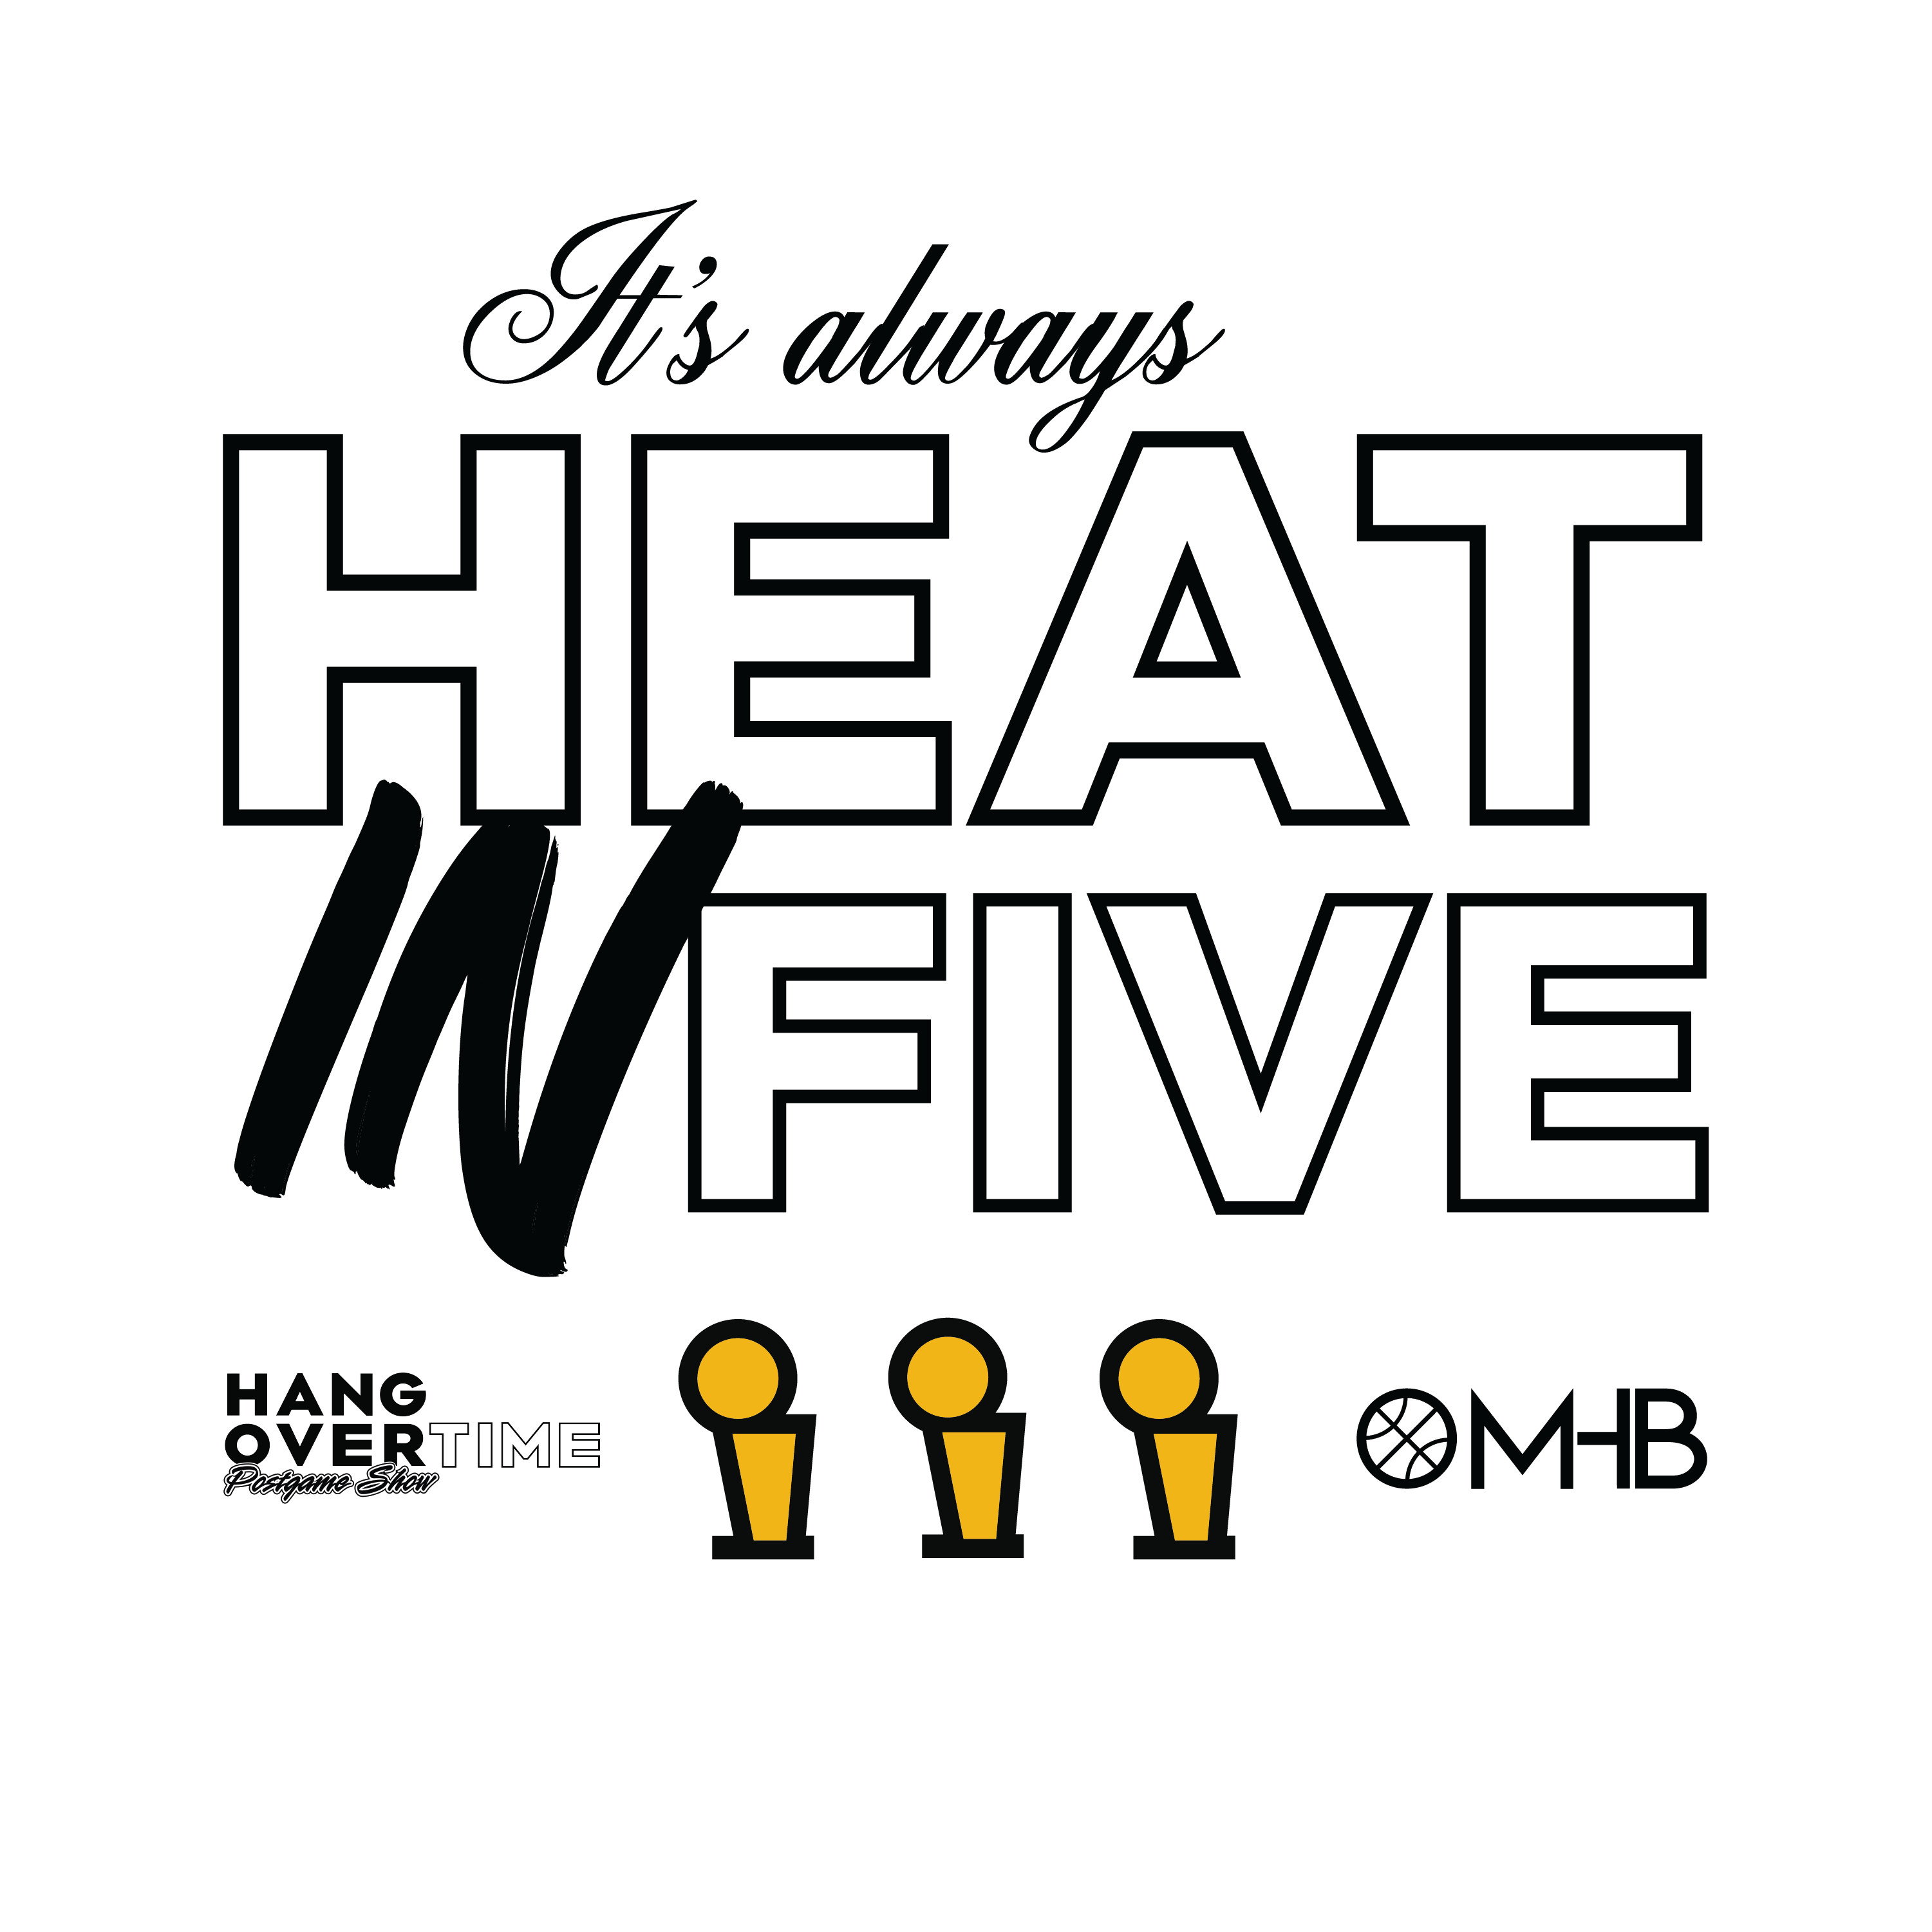 Heat In 5 (“HOT” - White Edition)